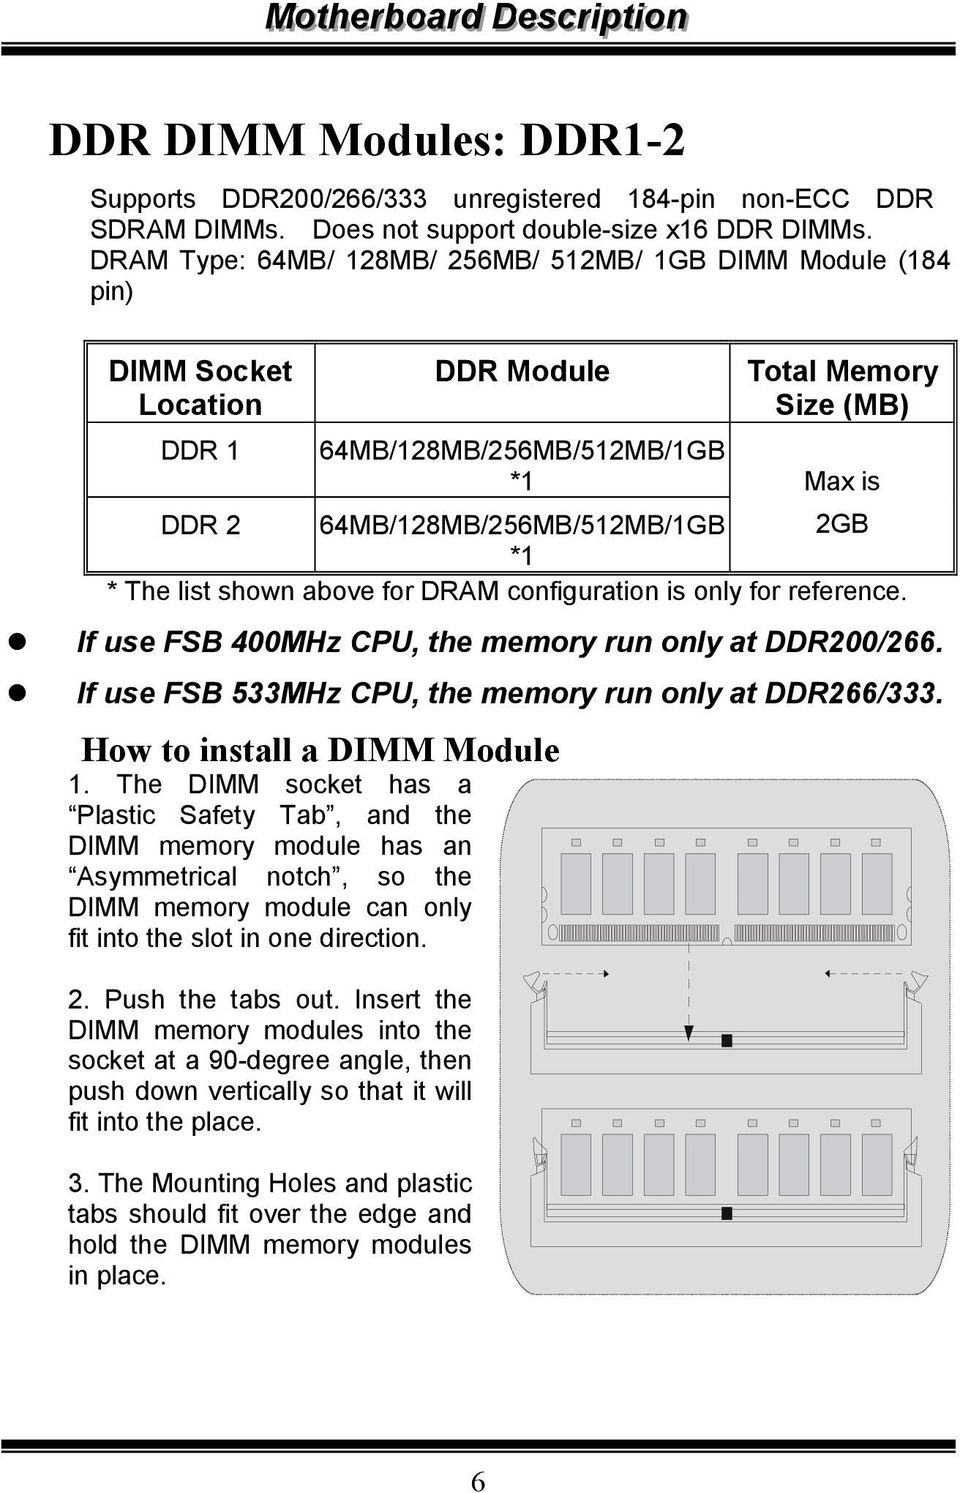 shown above for DRAM configuration is only for reference. If use FSB 400MHz CPU, the memory run only at DDR200/266. If use FSB 533MHz CPU, the memory run only at DDR266/333.